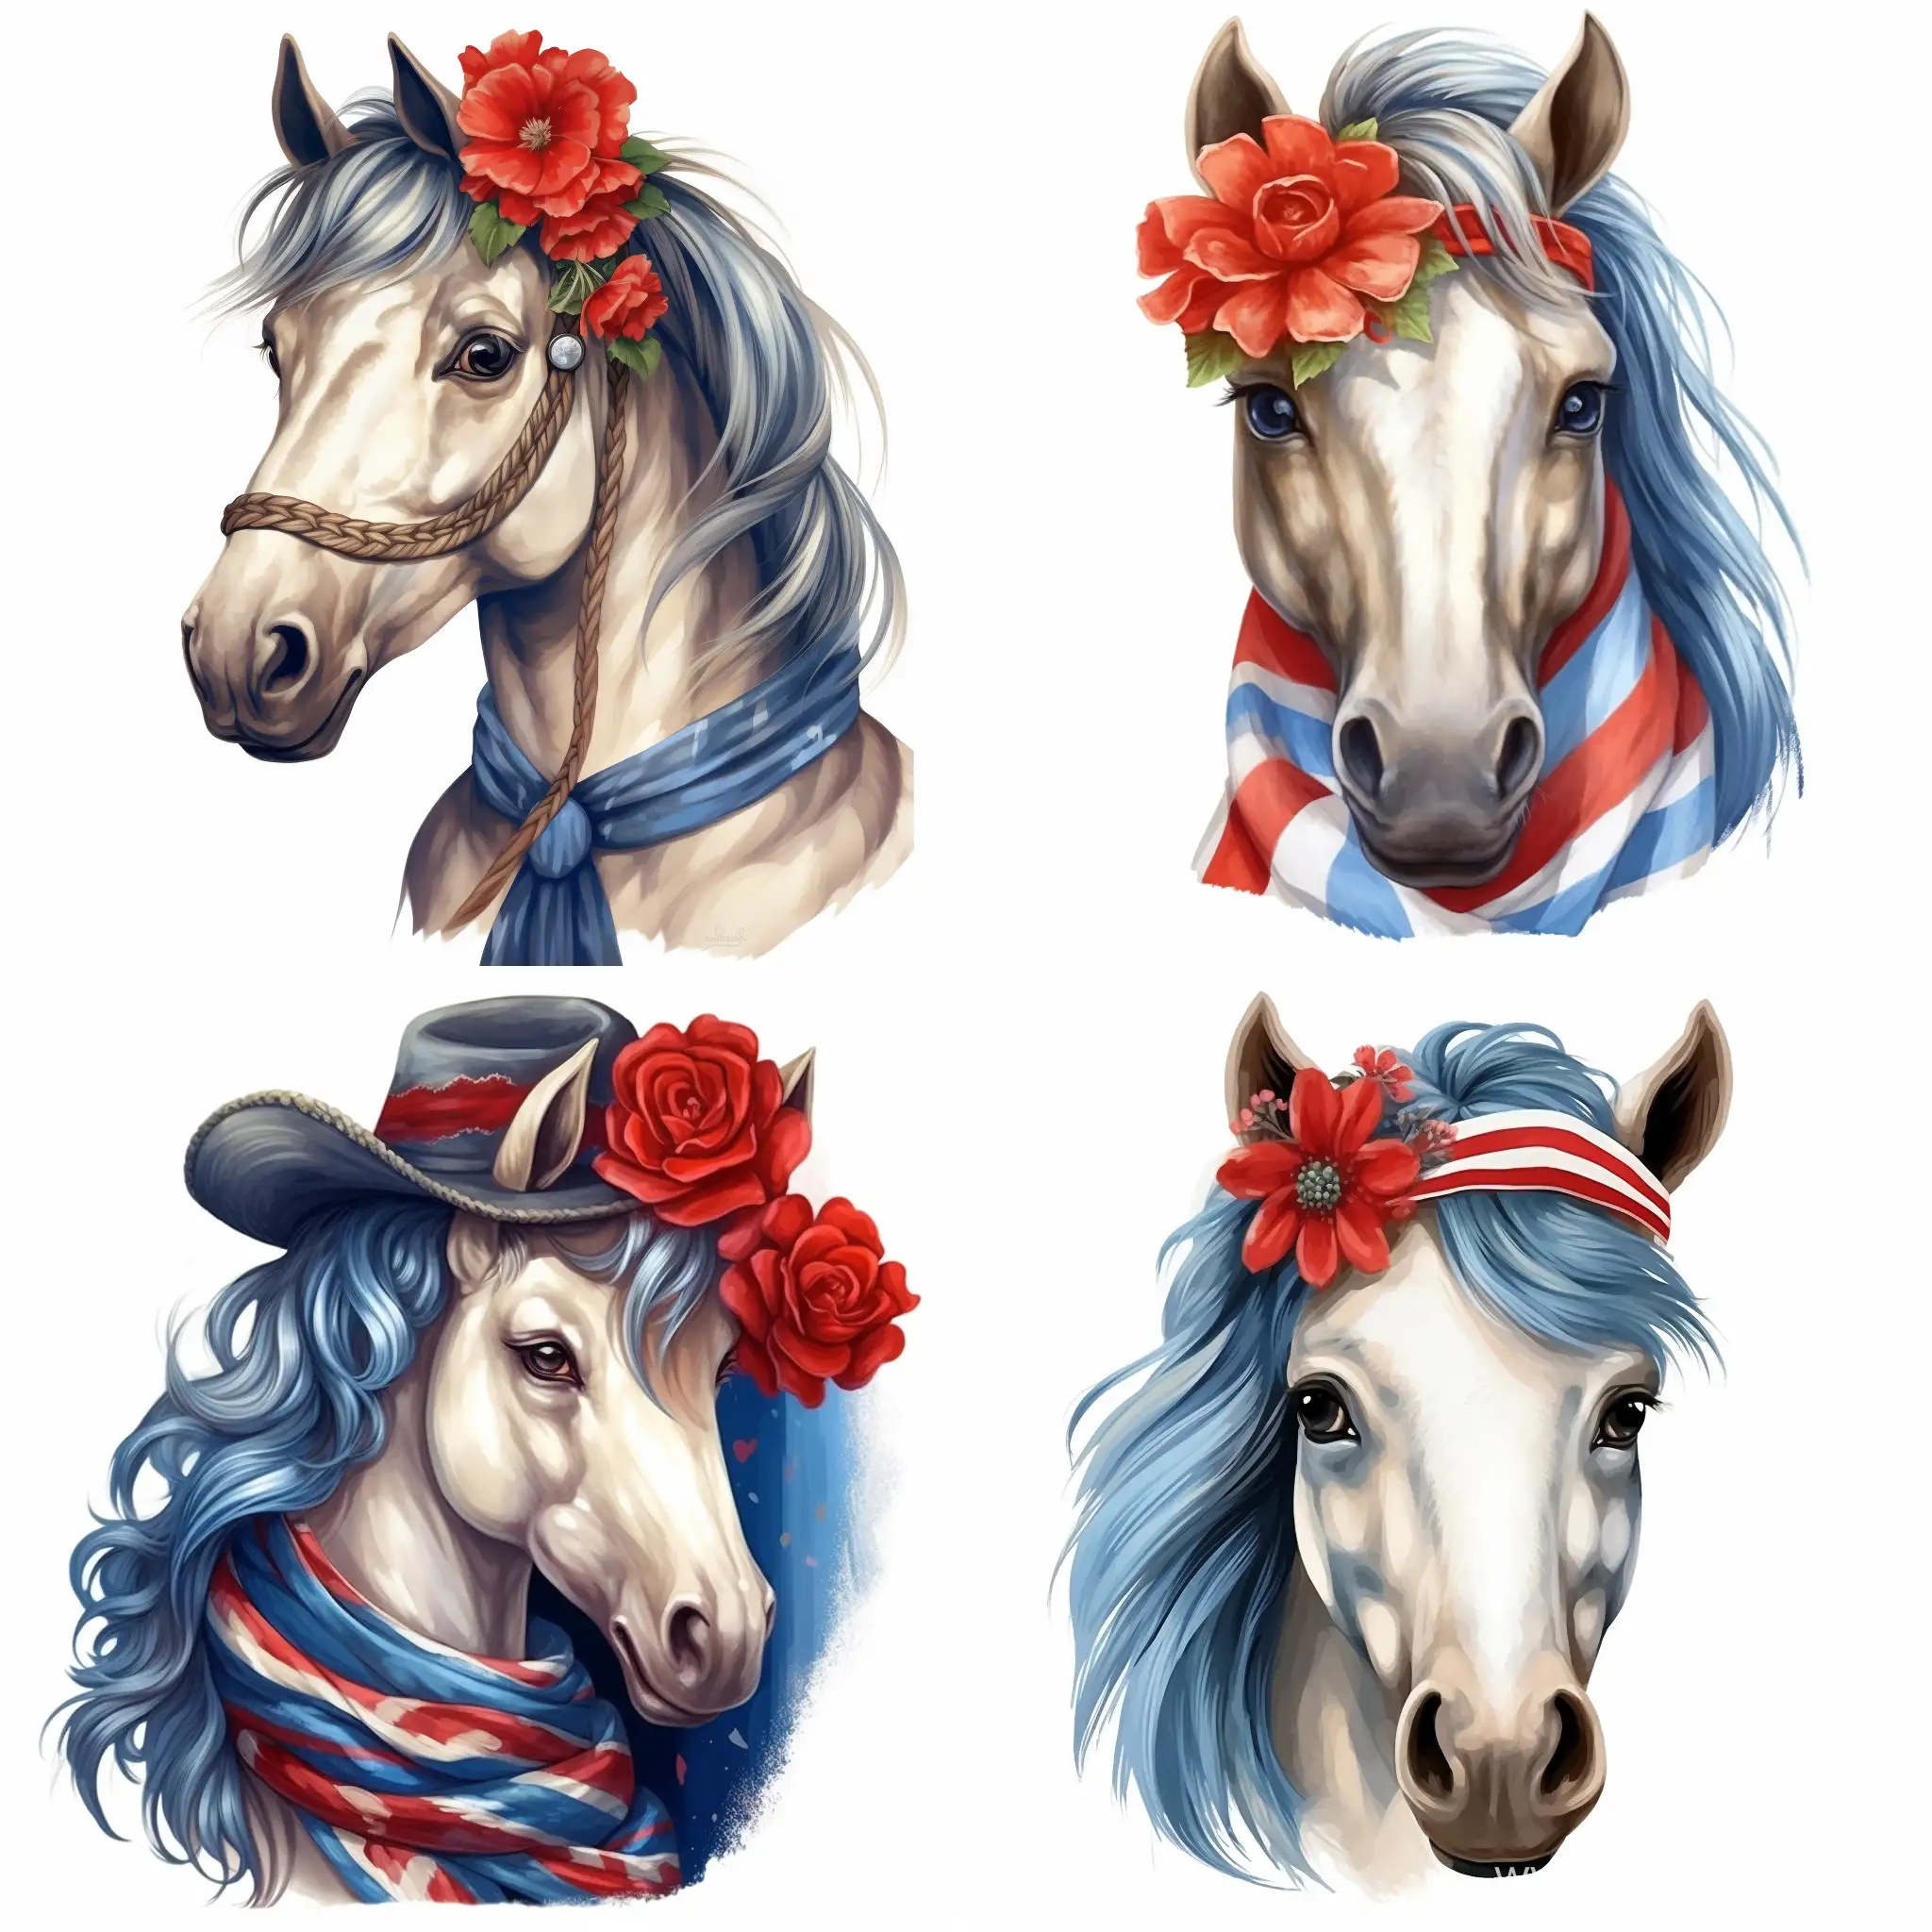 Adorable-BlueManed-Unicorn-Pony-with-Cowboy-Hat-and-Striped-Scarf